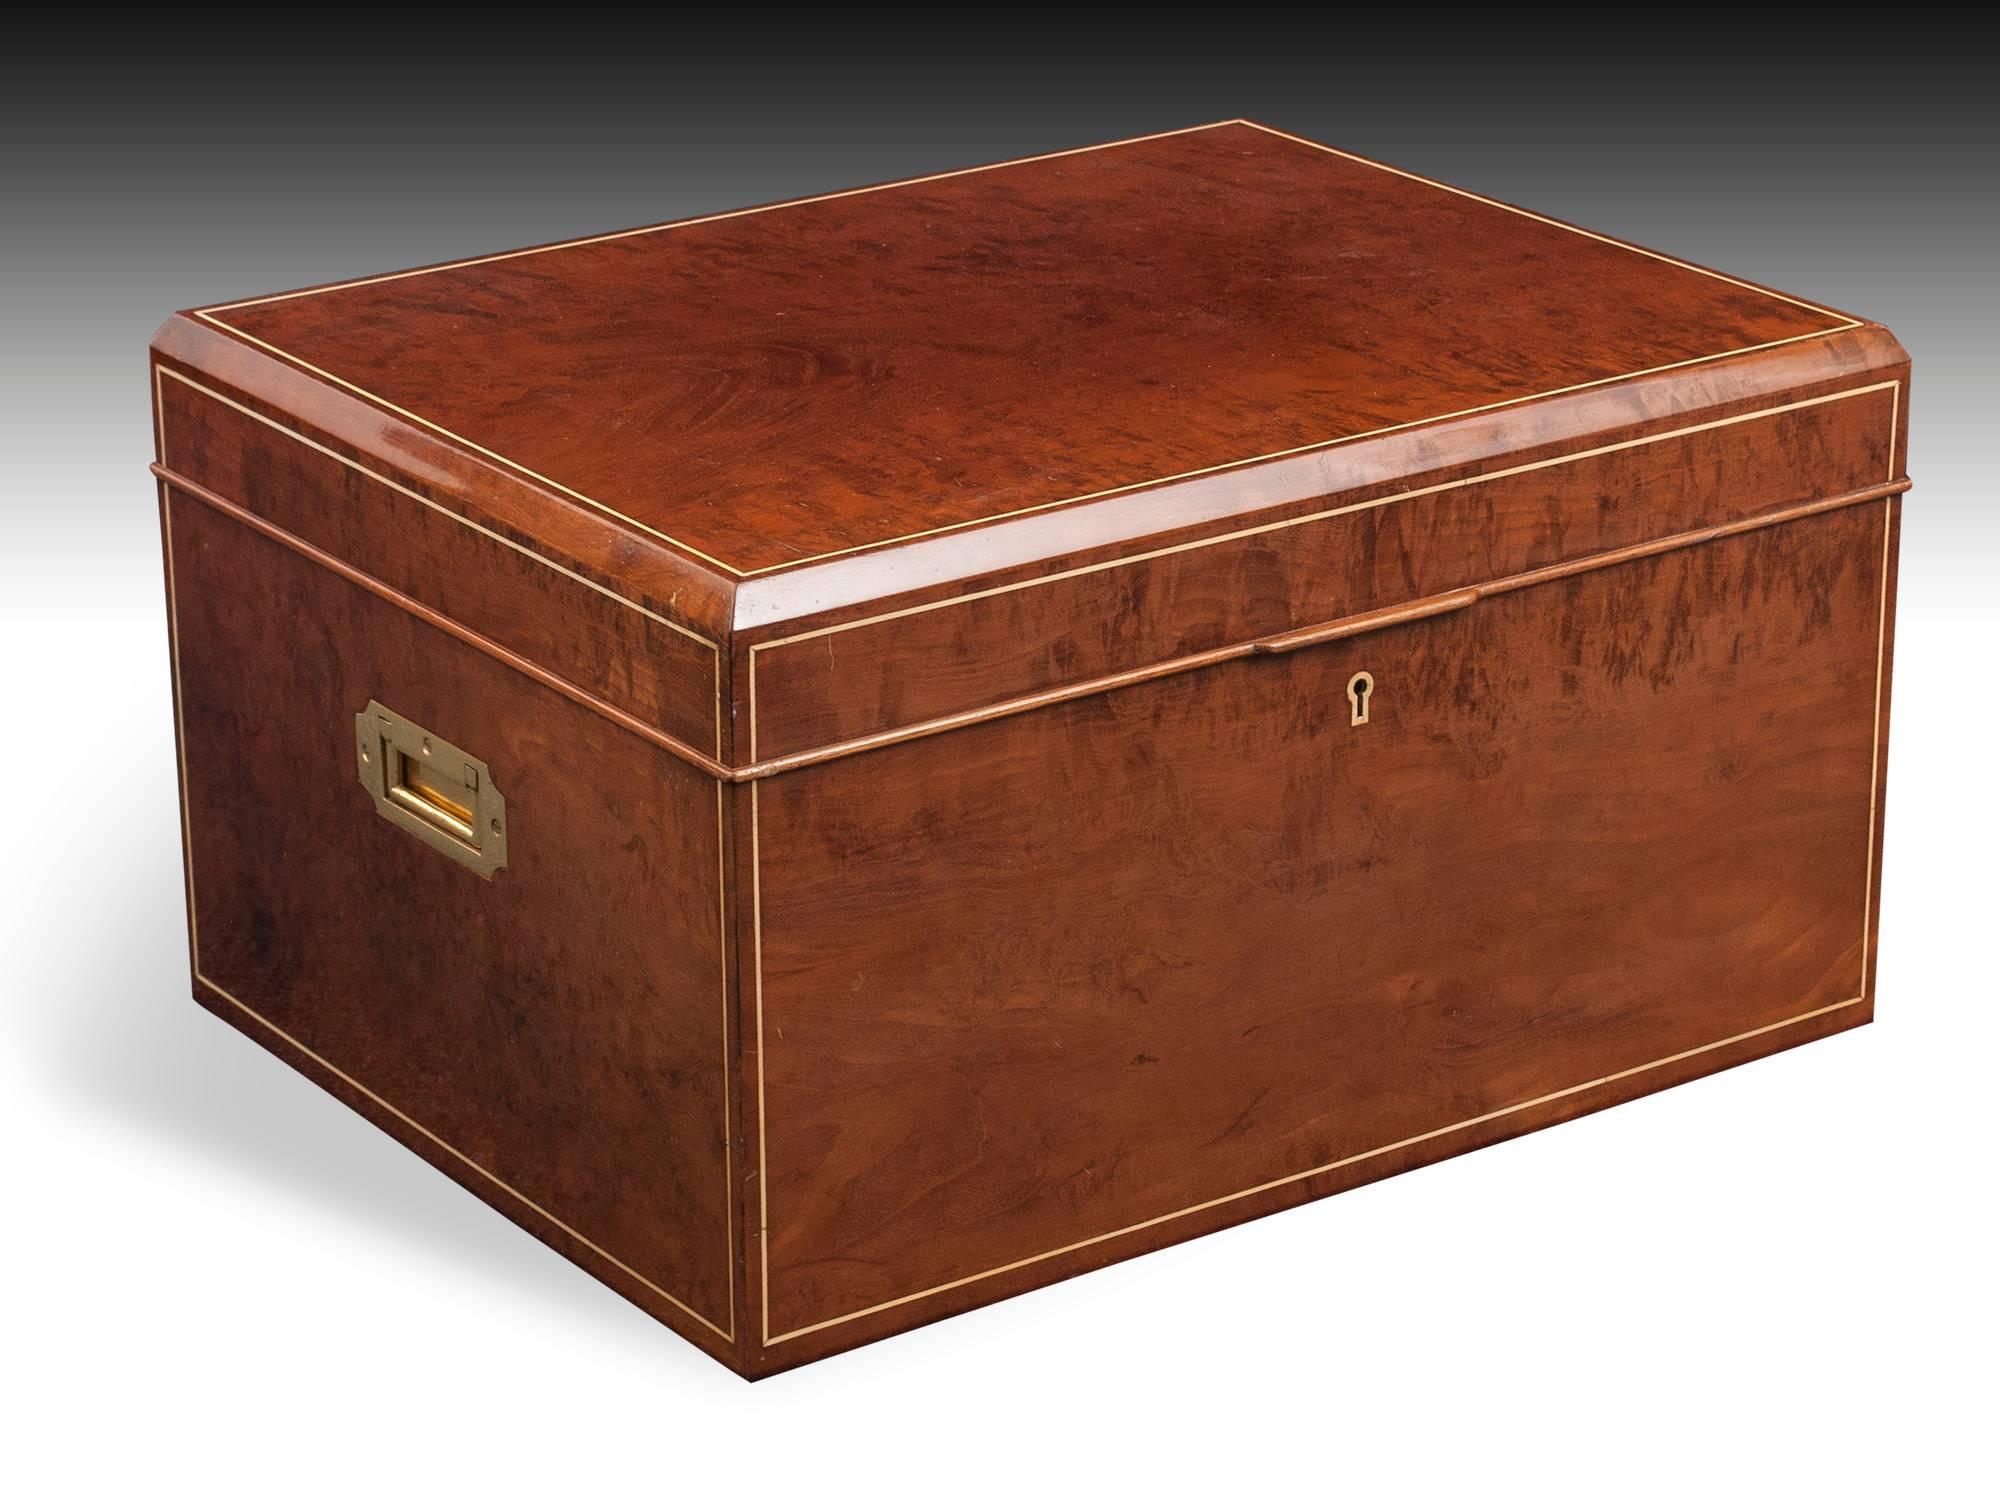 Very rich, impressive cigar box on a stand. A piece which will attract many admiring glances due to its Classic Art Deco elegance.
The figured red walnut selected by Dunhill for this piece is not only unusual but visually stunning, and has great